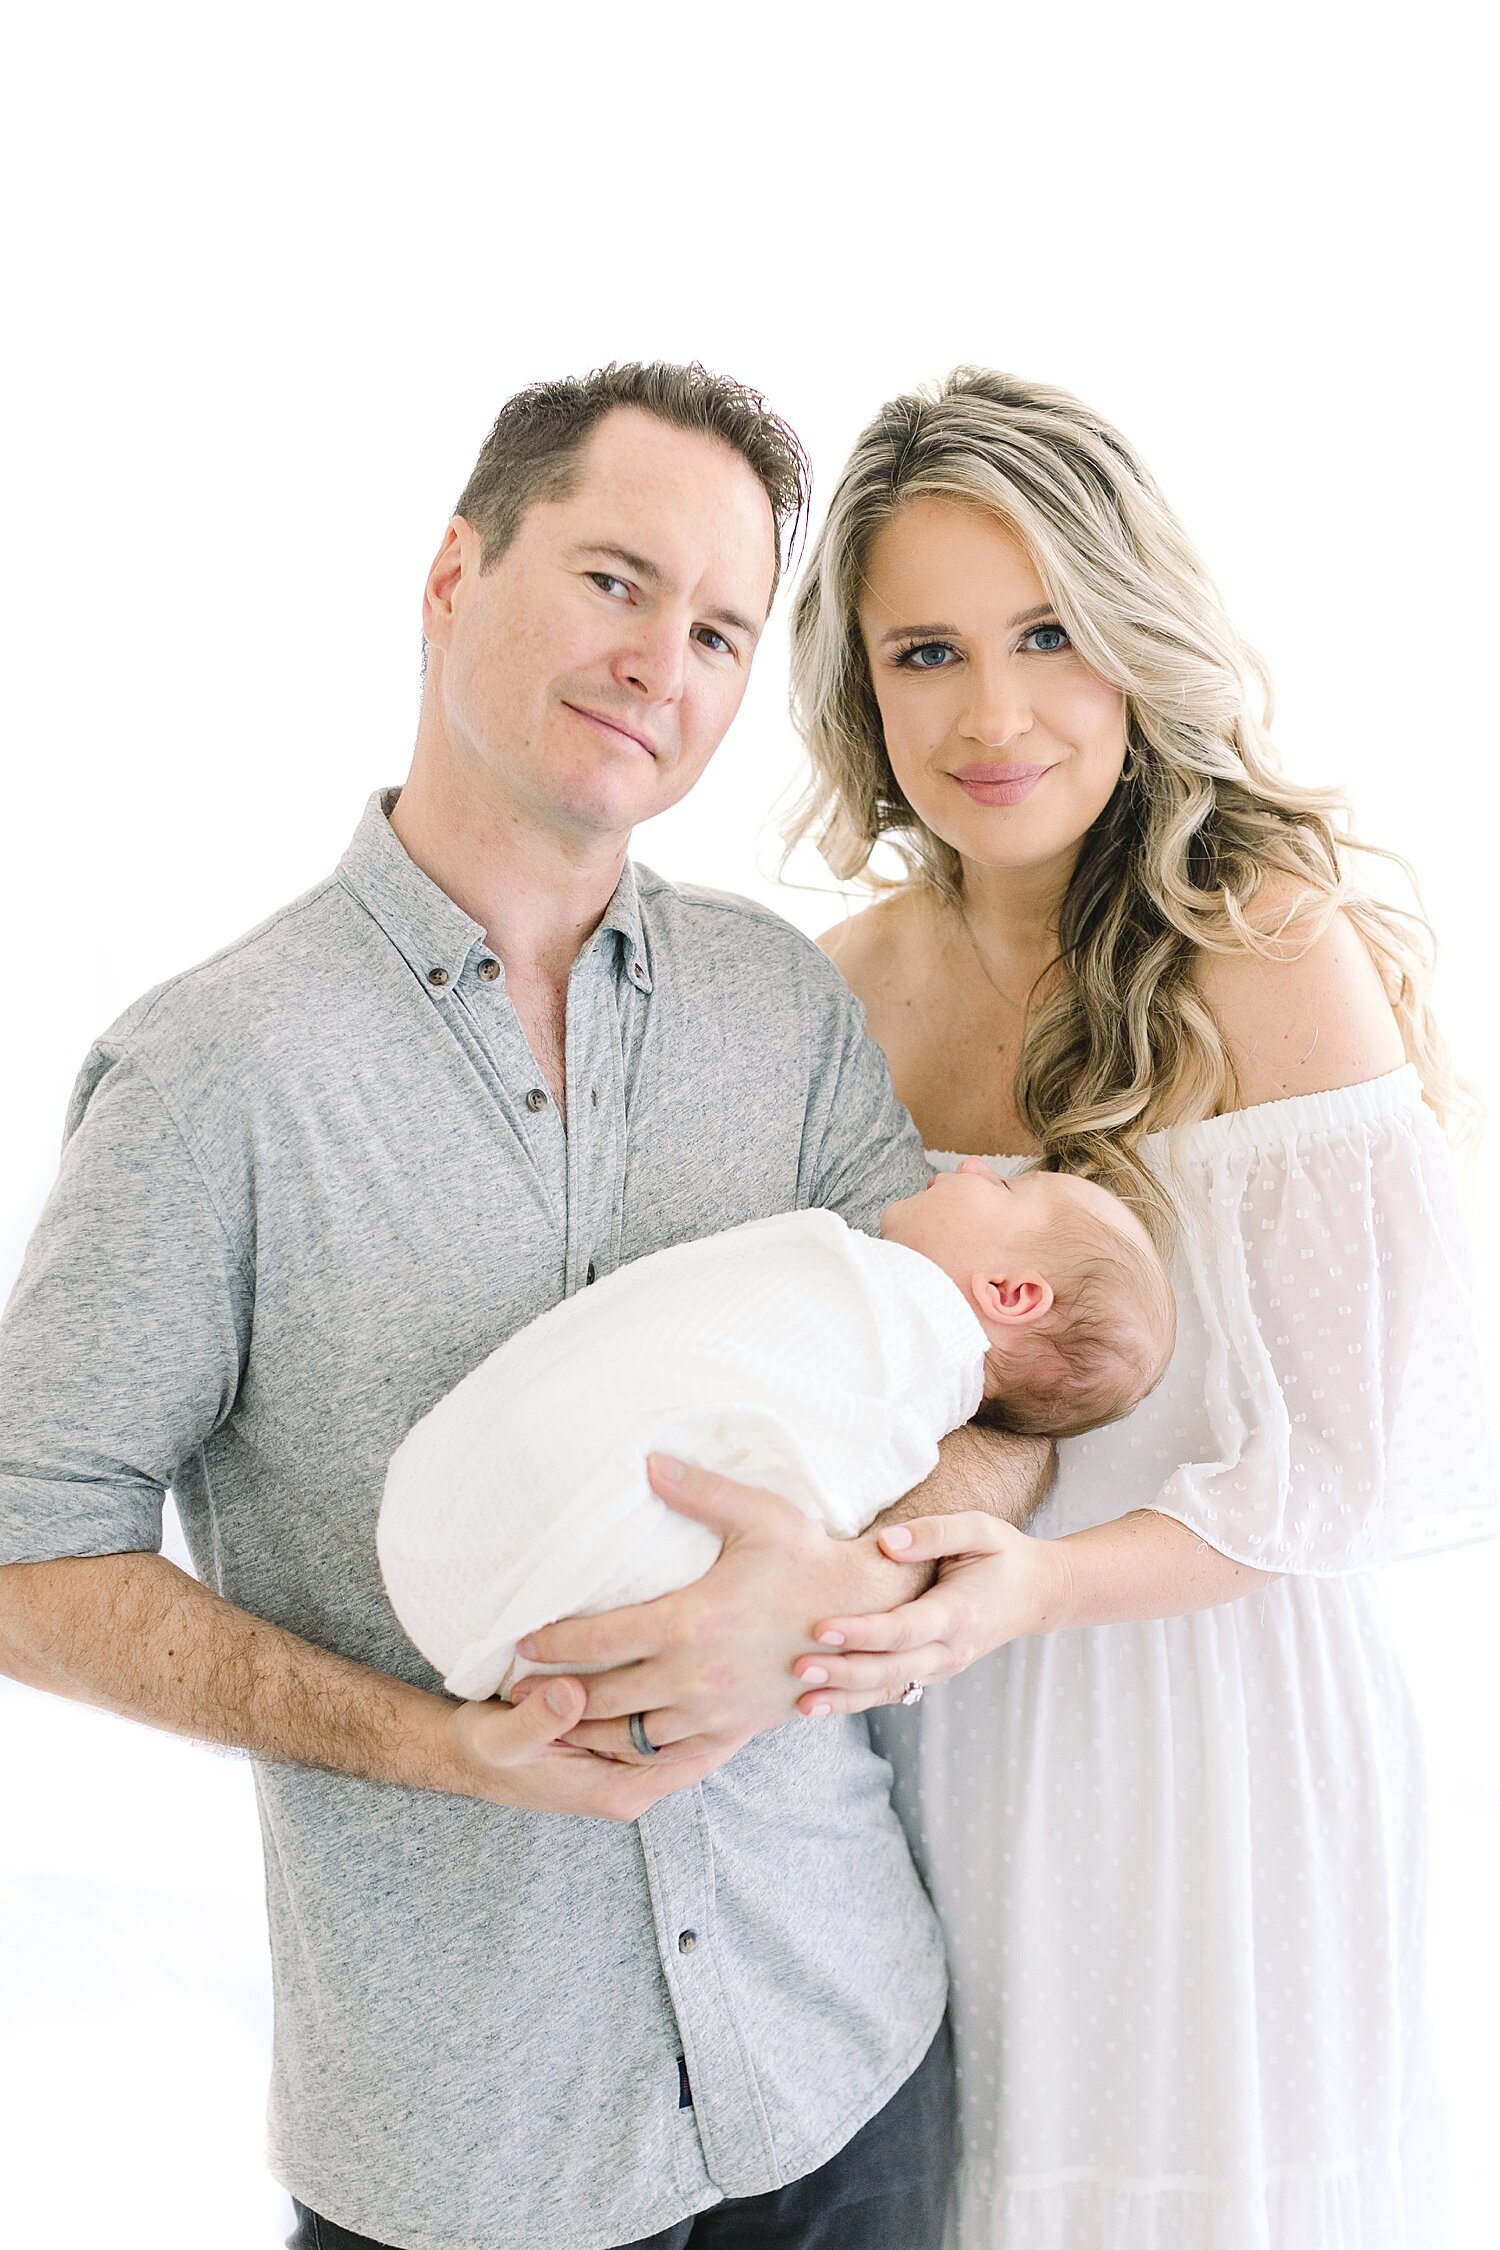 Family portrait in studio in Newport Beach. Photos by Ambre Williams Photography.